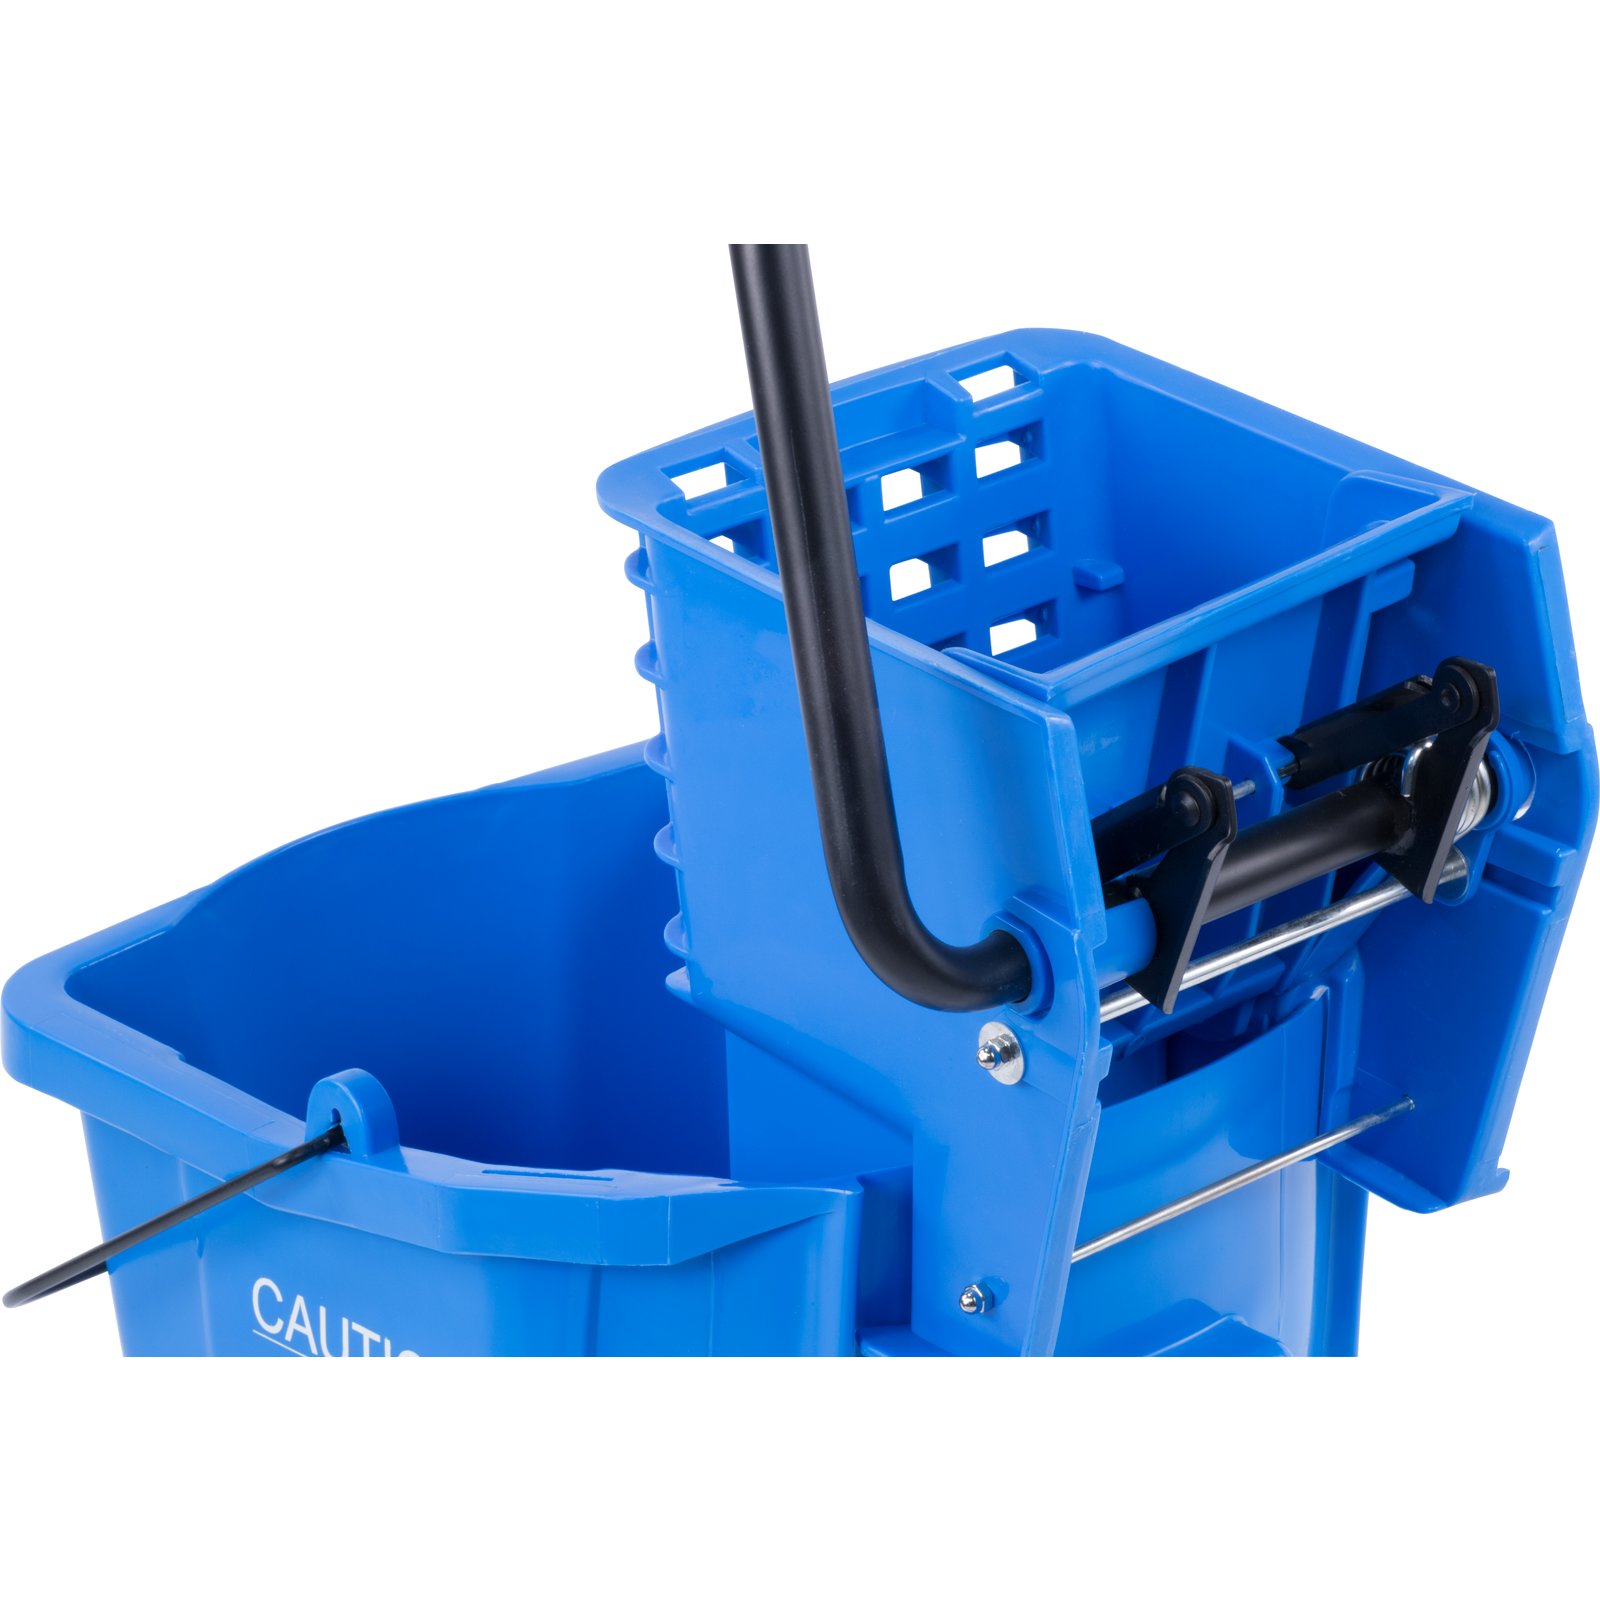  Mop Bucket and Wringer, 8-3/4 gal, Blue : Health & Household